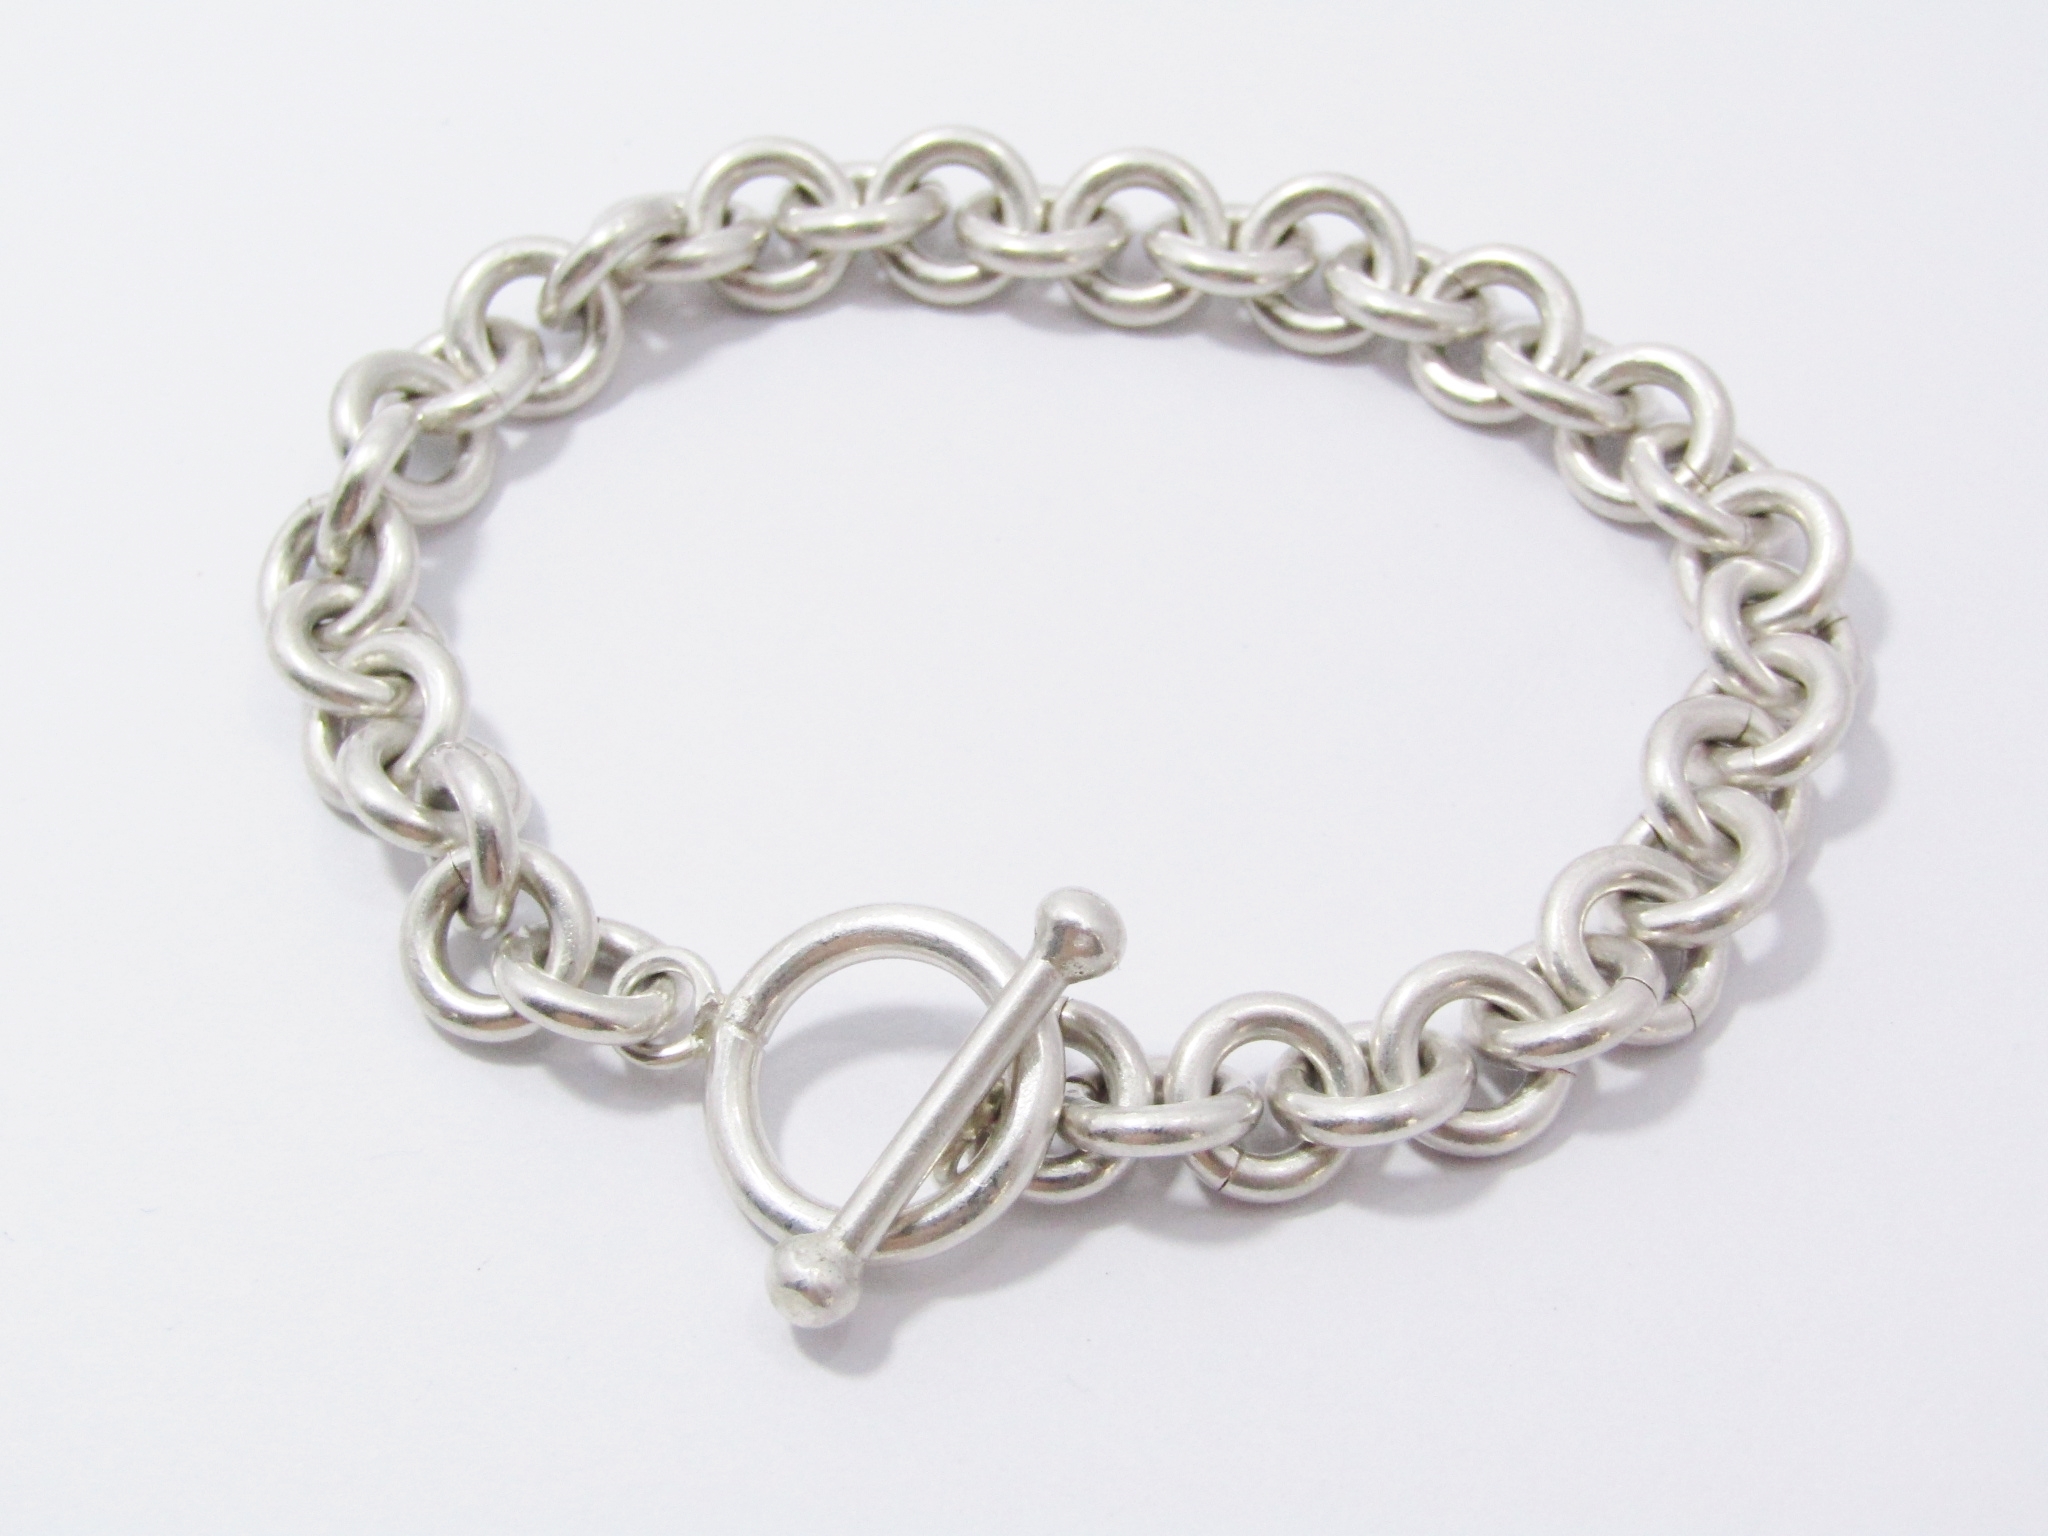 A Gorgeous Chunky Bracelet with a Fob Clasp in Sterling Silver.